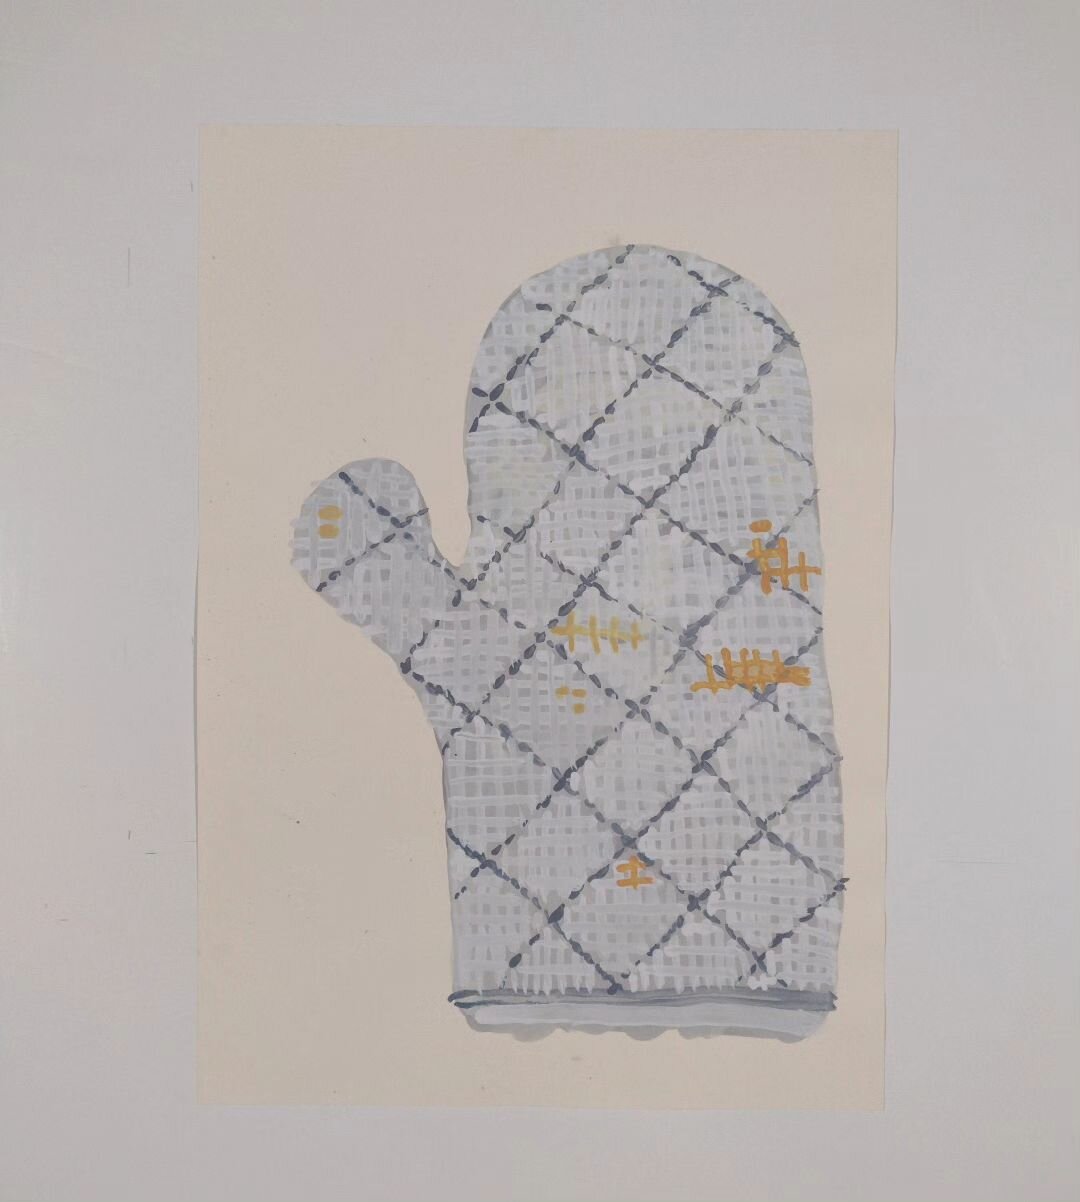 An ode to Joy Division Oven Gloves
Acrylic on paper 2008
#hamfisted #precision #acrylic #paper #tohottohandle #halfmanhalfbiscuit  #gloves will tear us apart 
25 mins at #180 should do it